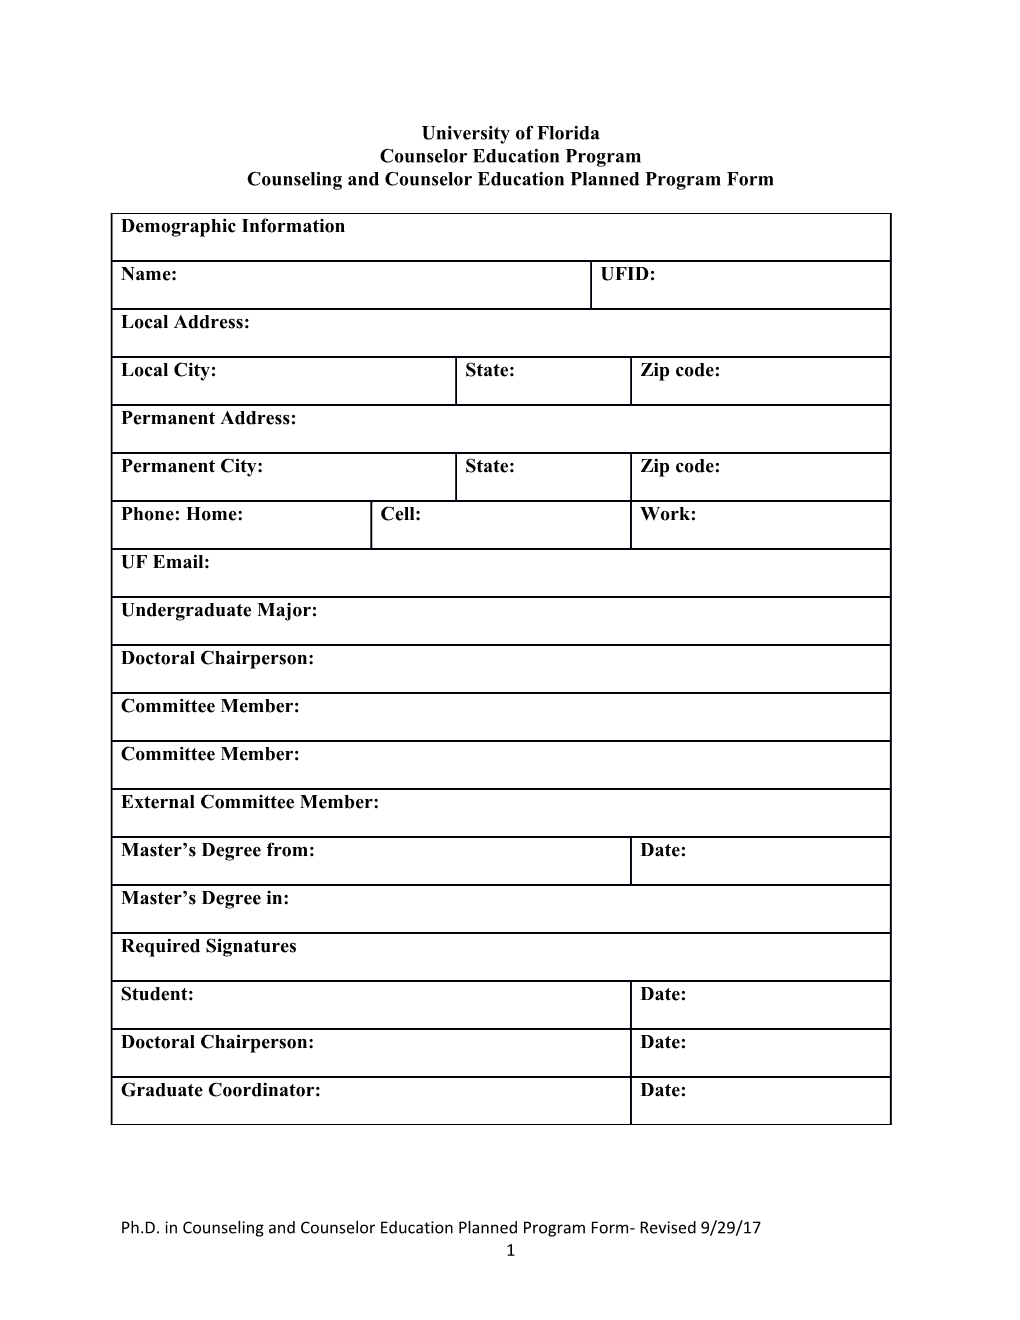 Counseling and Counselor Education Planned Program Form